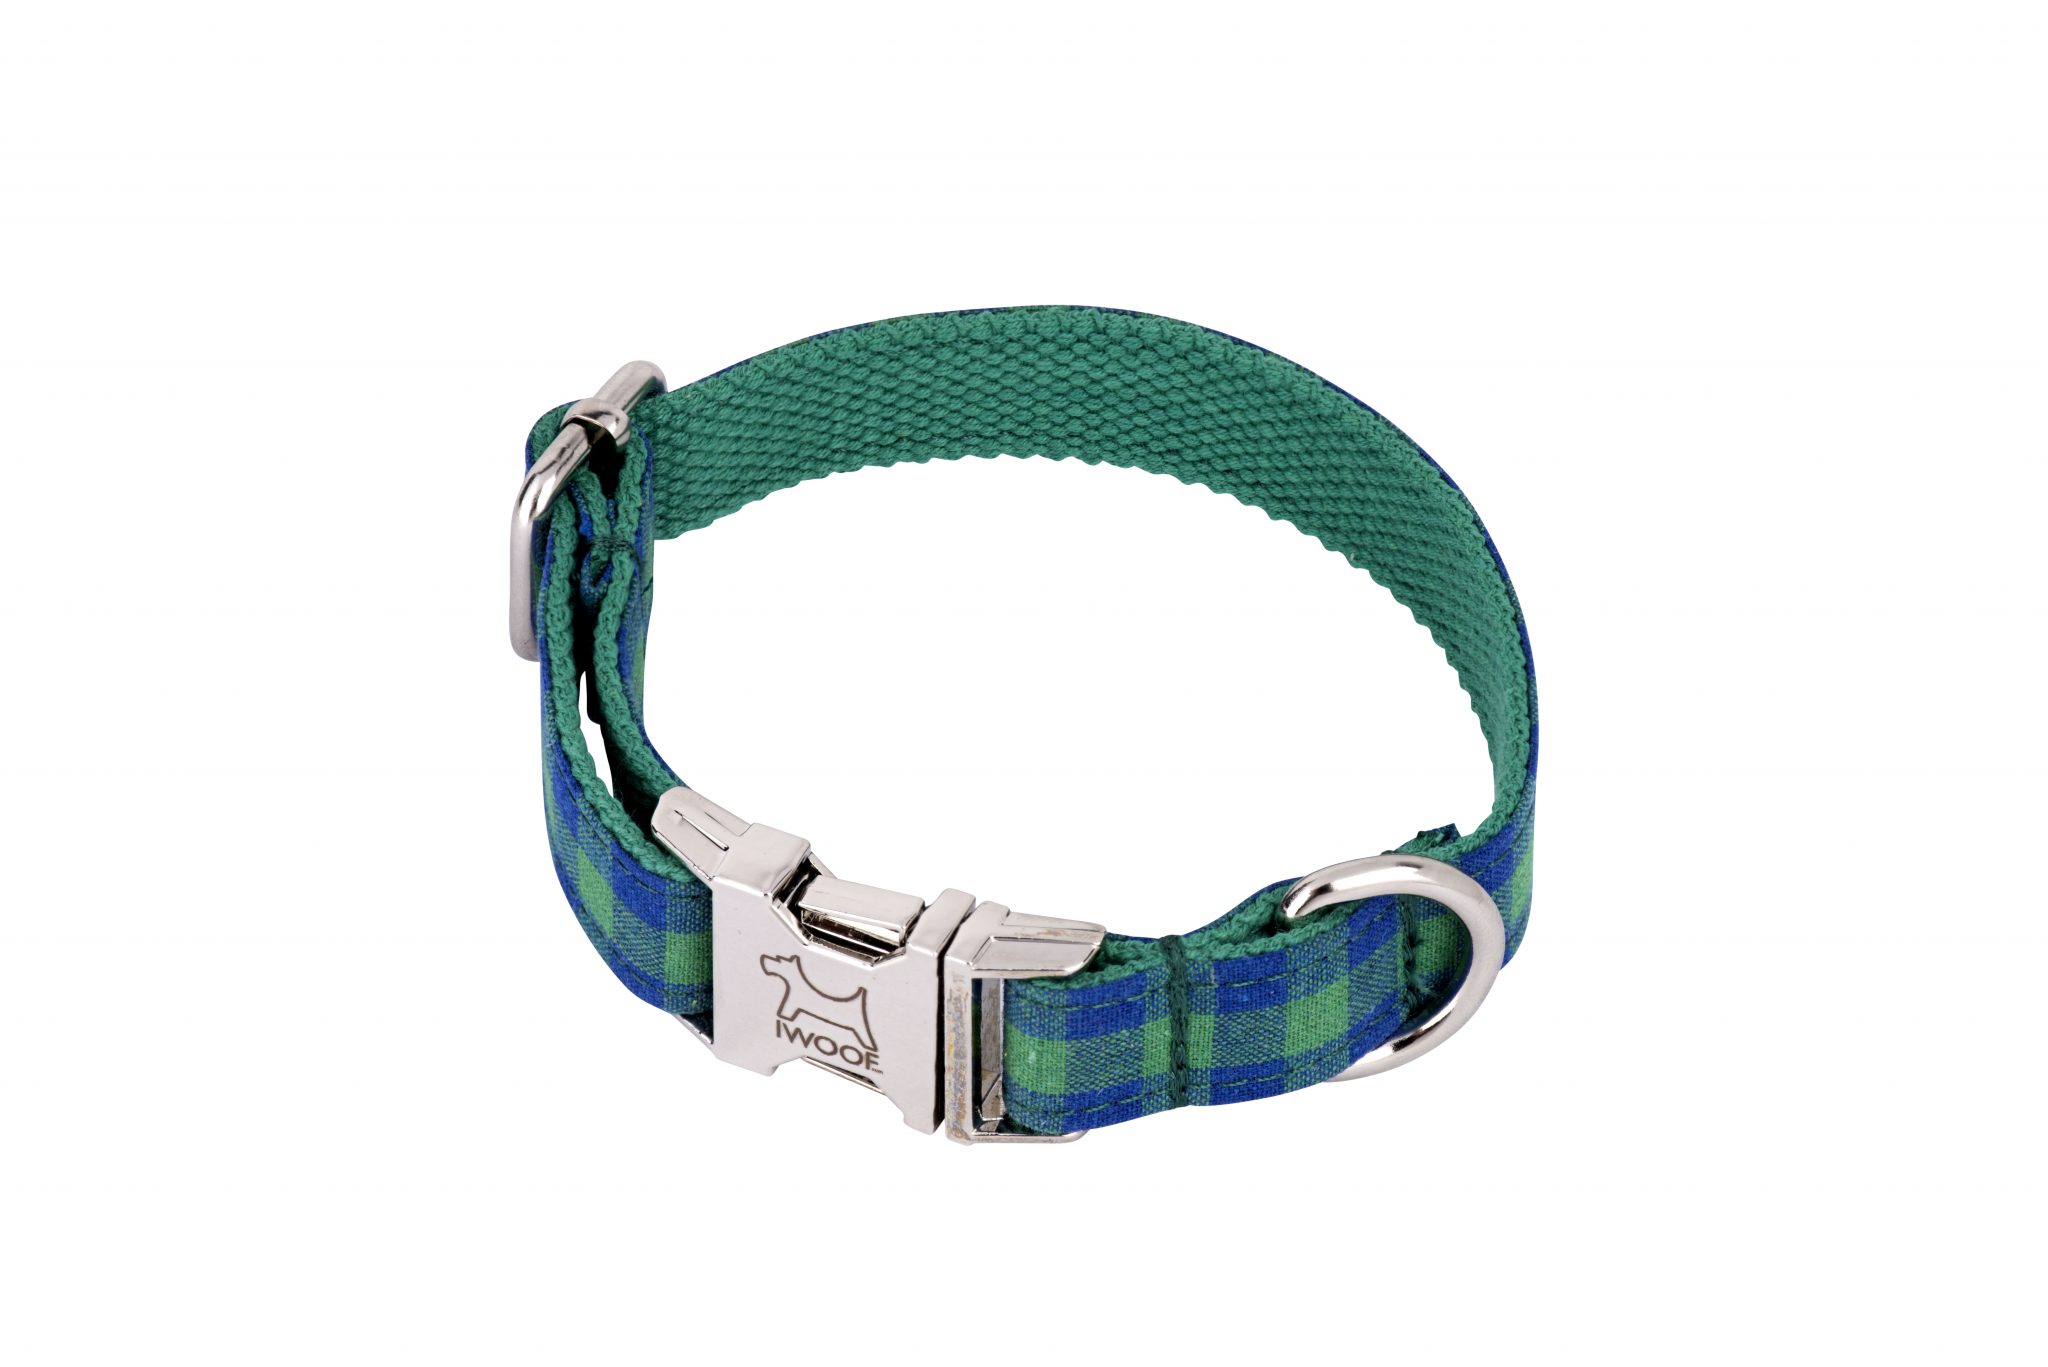 Blue and Green check designer dog collar and dog lead by IWOOF